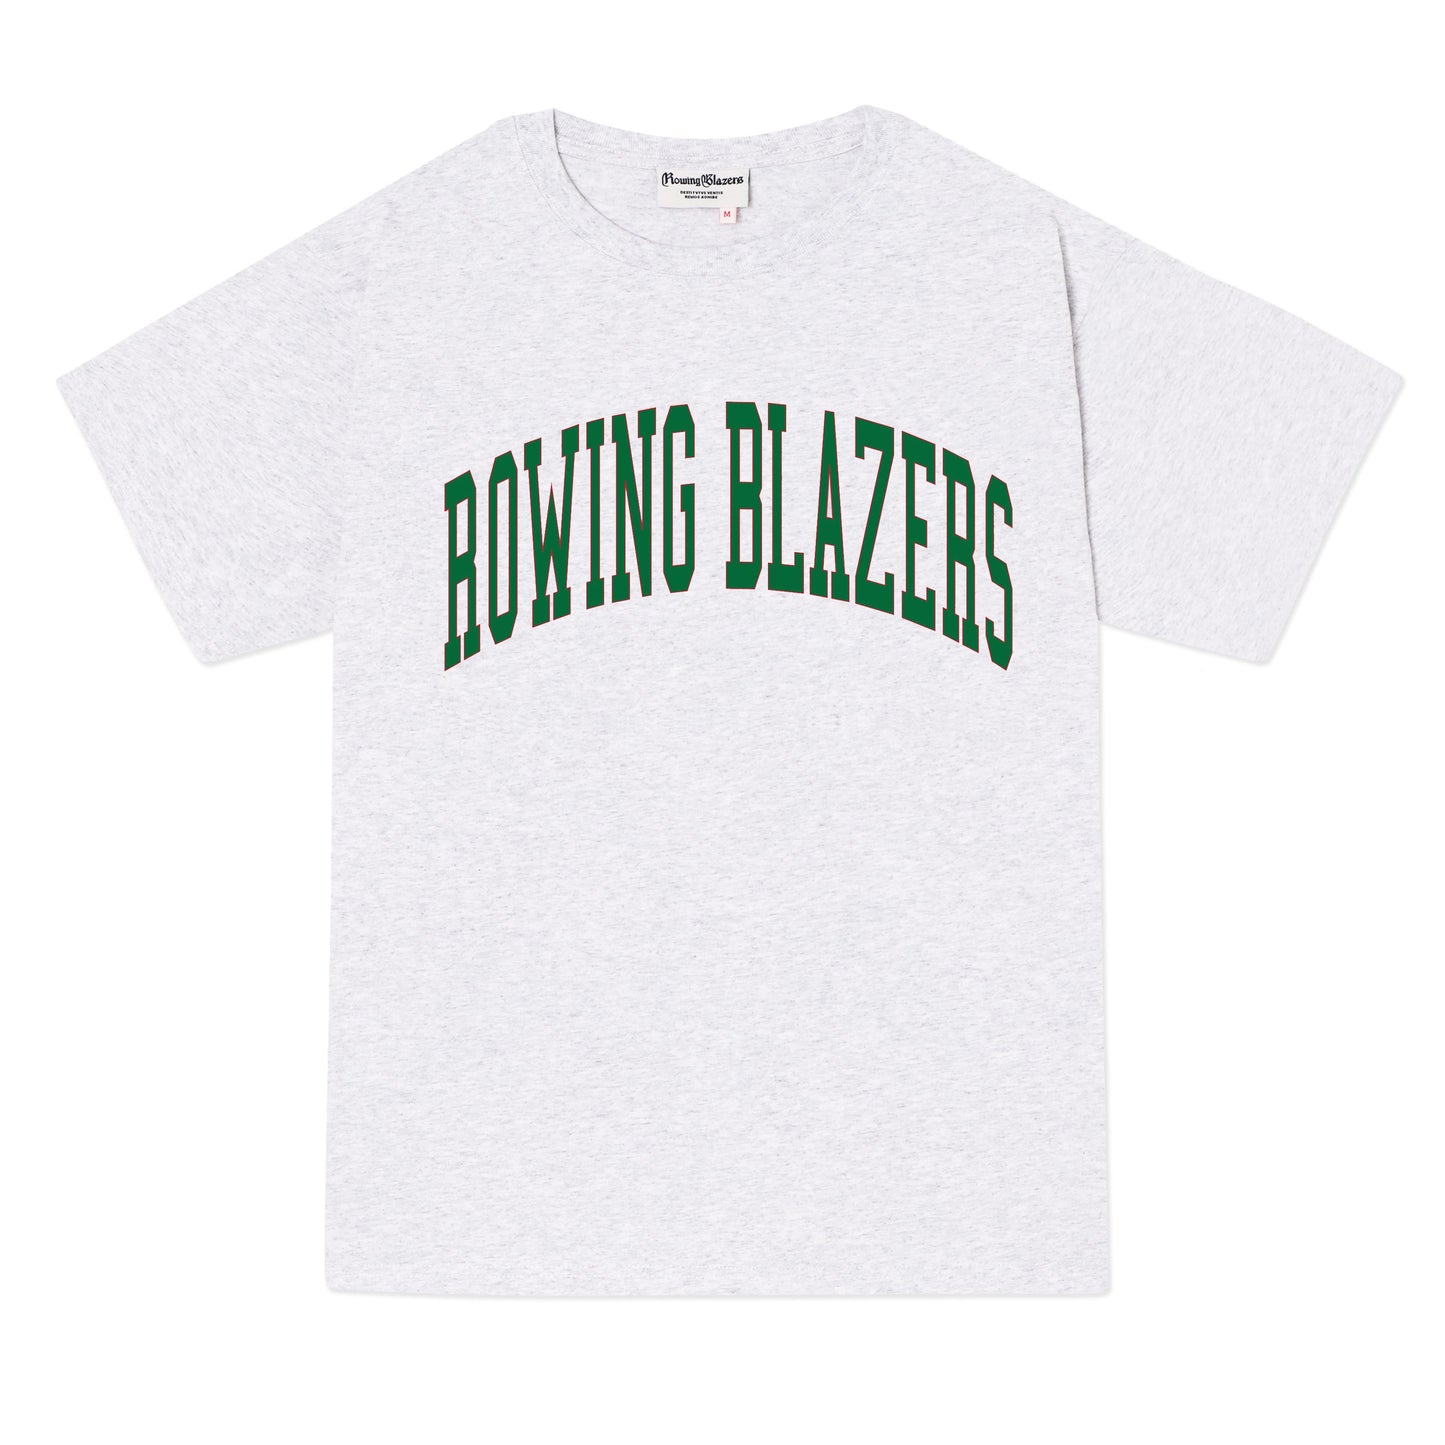 Classic light heather gray collegiate tee with "Rowing Blazers" across the front in dark green.